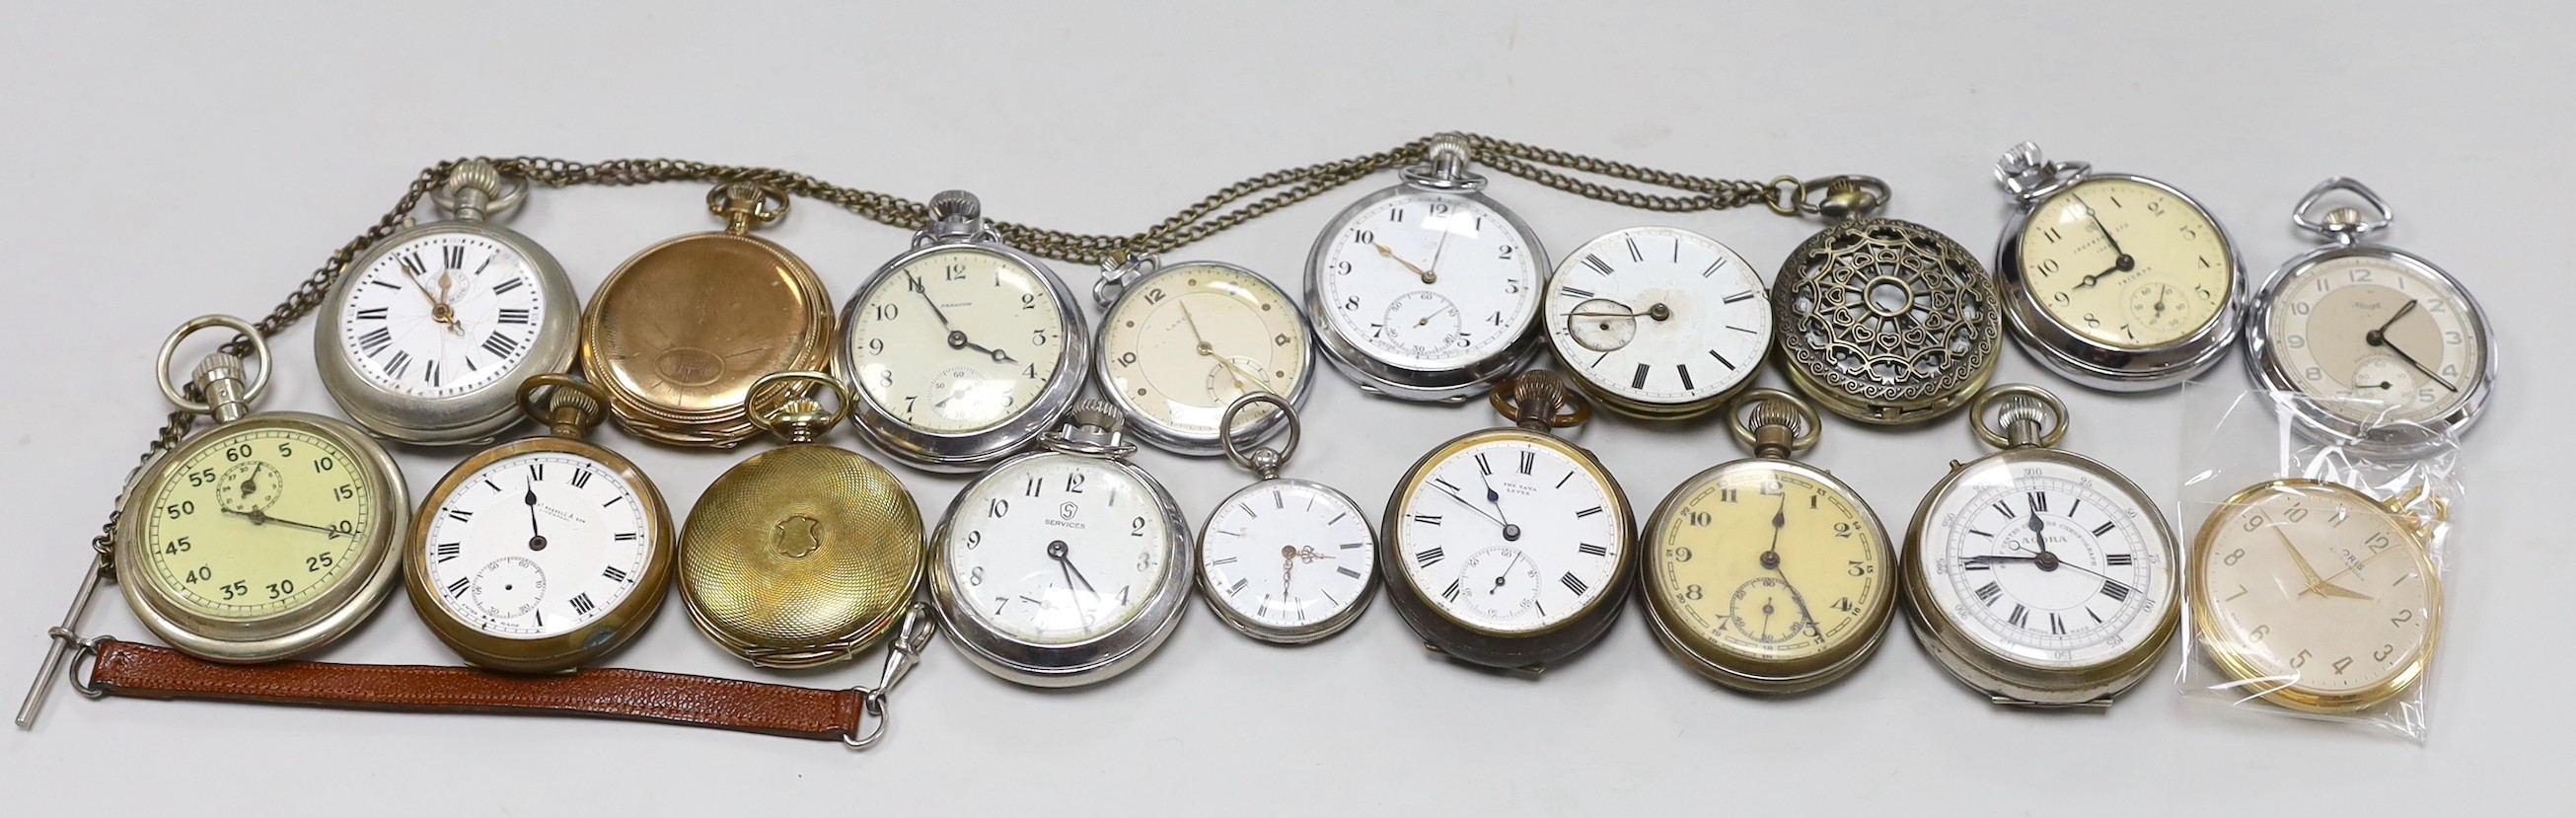 Eighteen assorted base metal pocket watches, including Ingersoll, Lanco and Paragon, some a.f. and a